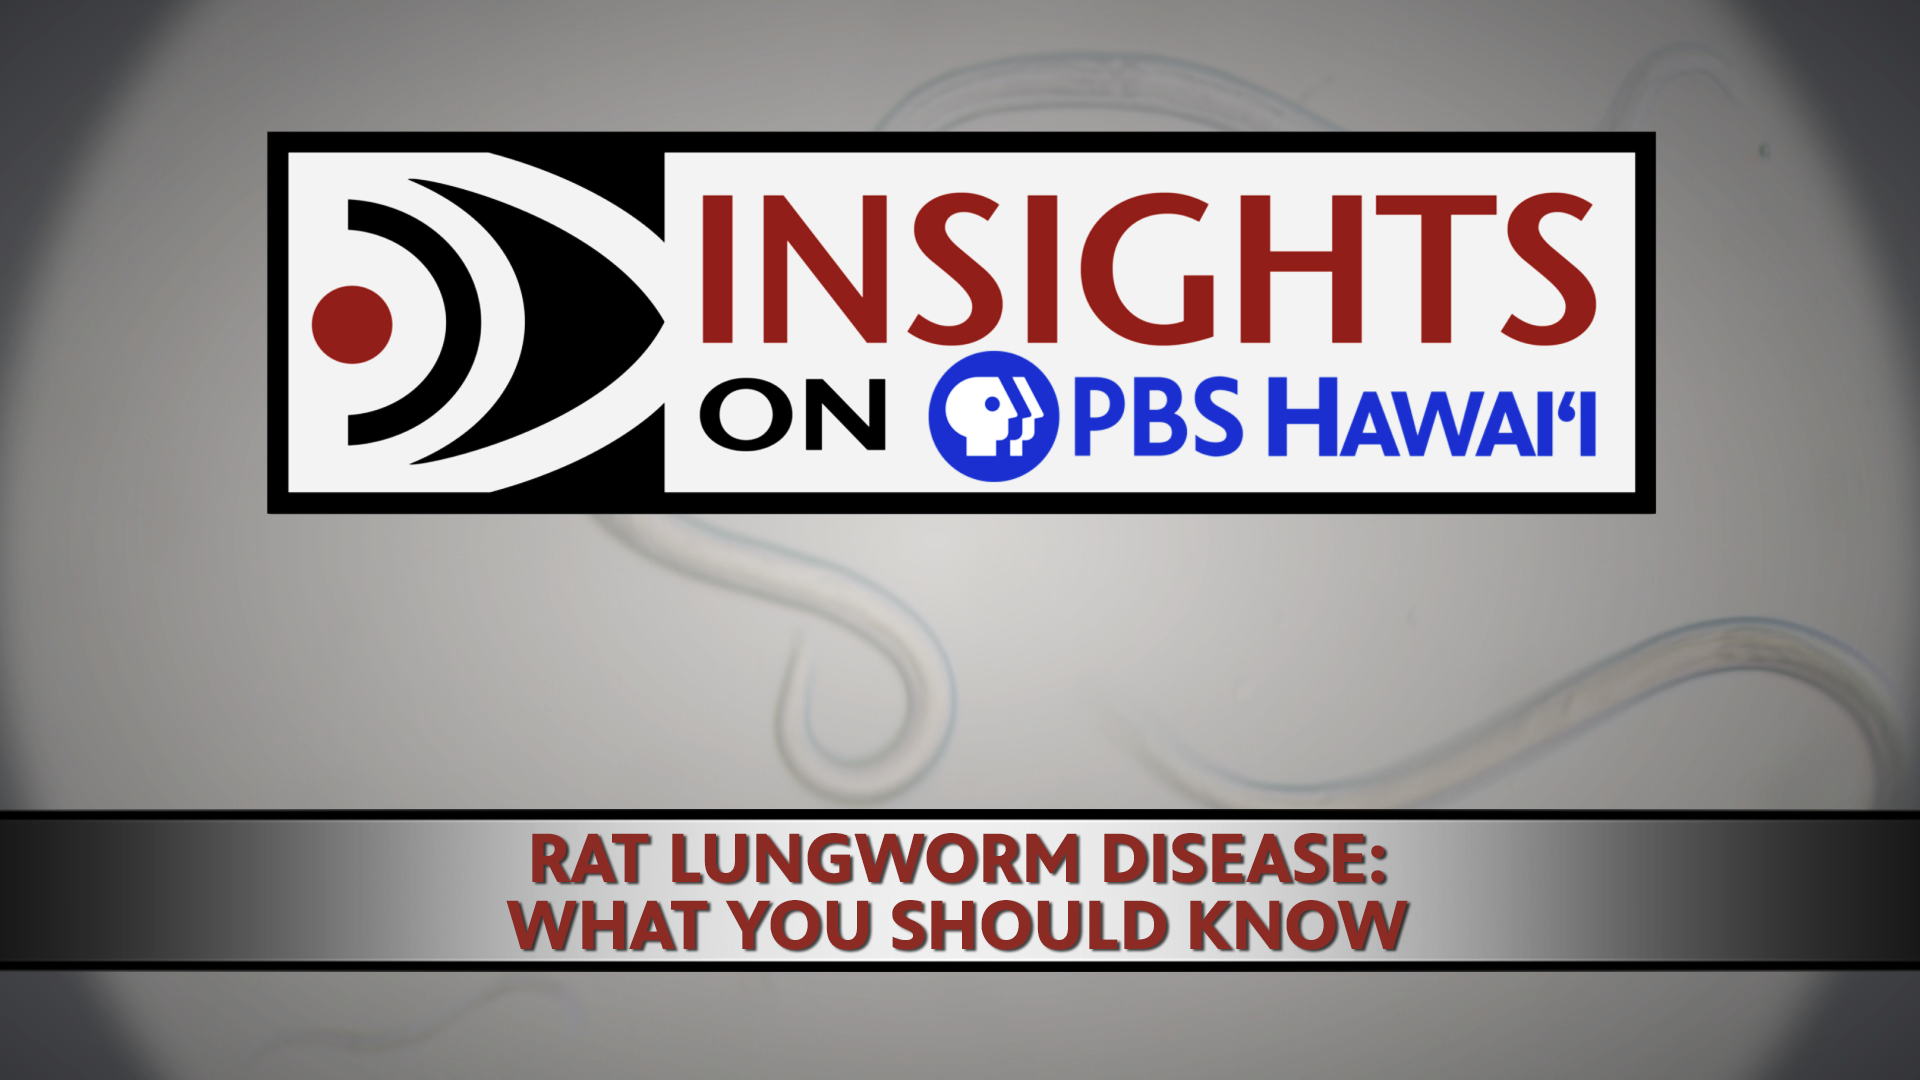 RAT LUNGWORM DISEASE: WHAT YOU SHOULD KNOW